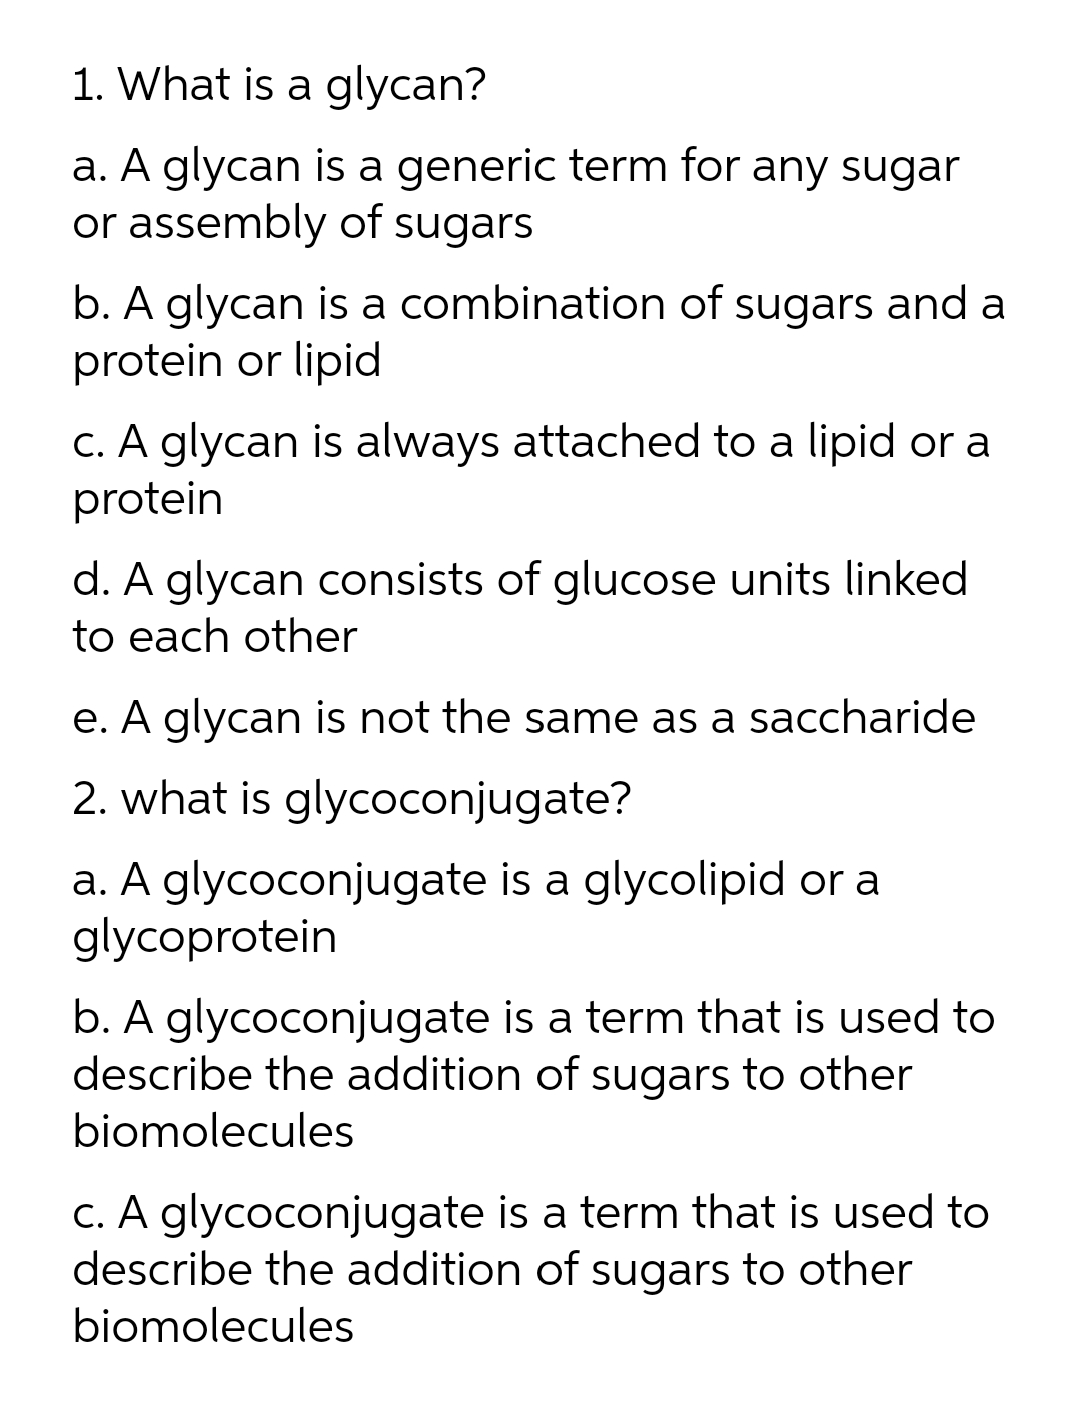 1. What is a glycan?
a. A glycan is a generic term for any sugar
or assembly of sugars
b. A glycan is a combination of sugars and a
protein or lipid
c. A glycan is always attached to a lipid or a
protein
d. A glycan consists of glucose units linked
to each other
e. A glycan is not the same as a saccharide
2. what is glycoconjugate?
a. A glycoconjugate is a glycolipid or a
glycoprotein
b. A glycoconjugate is a term that is used to
describe the addition of sugars to other
biomolecules
C. A glycoconjugate is a term that is used to
describe the addition of sugars to other
biomolecules
